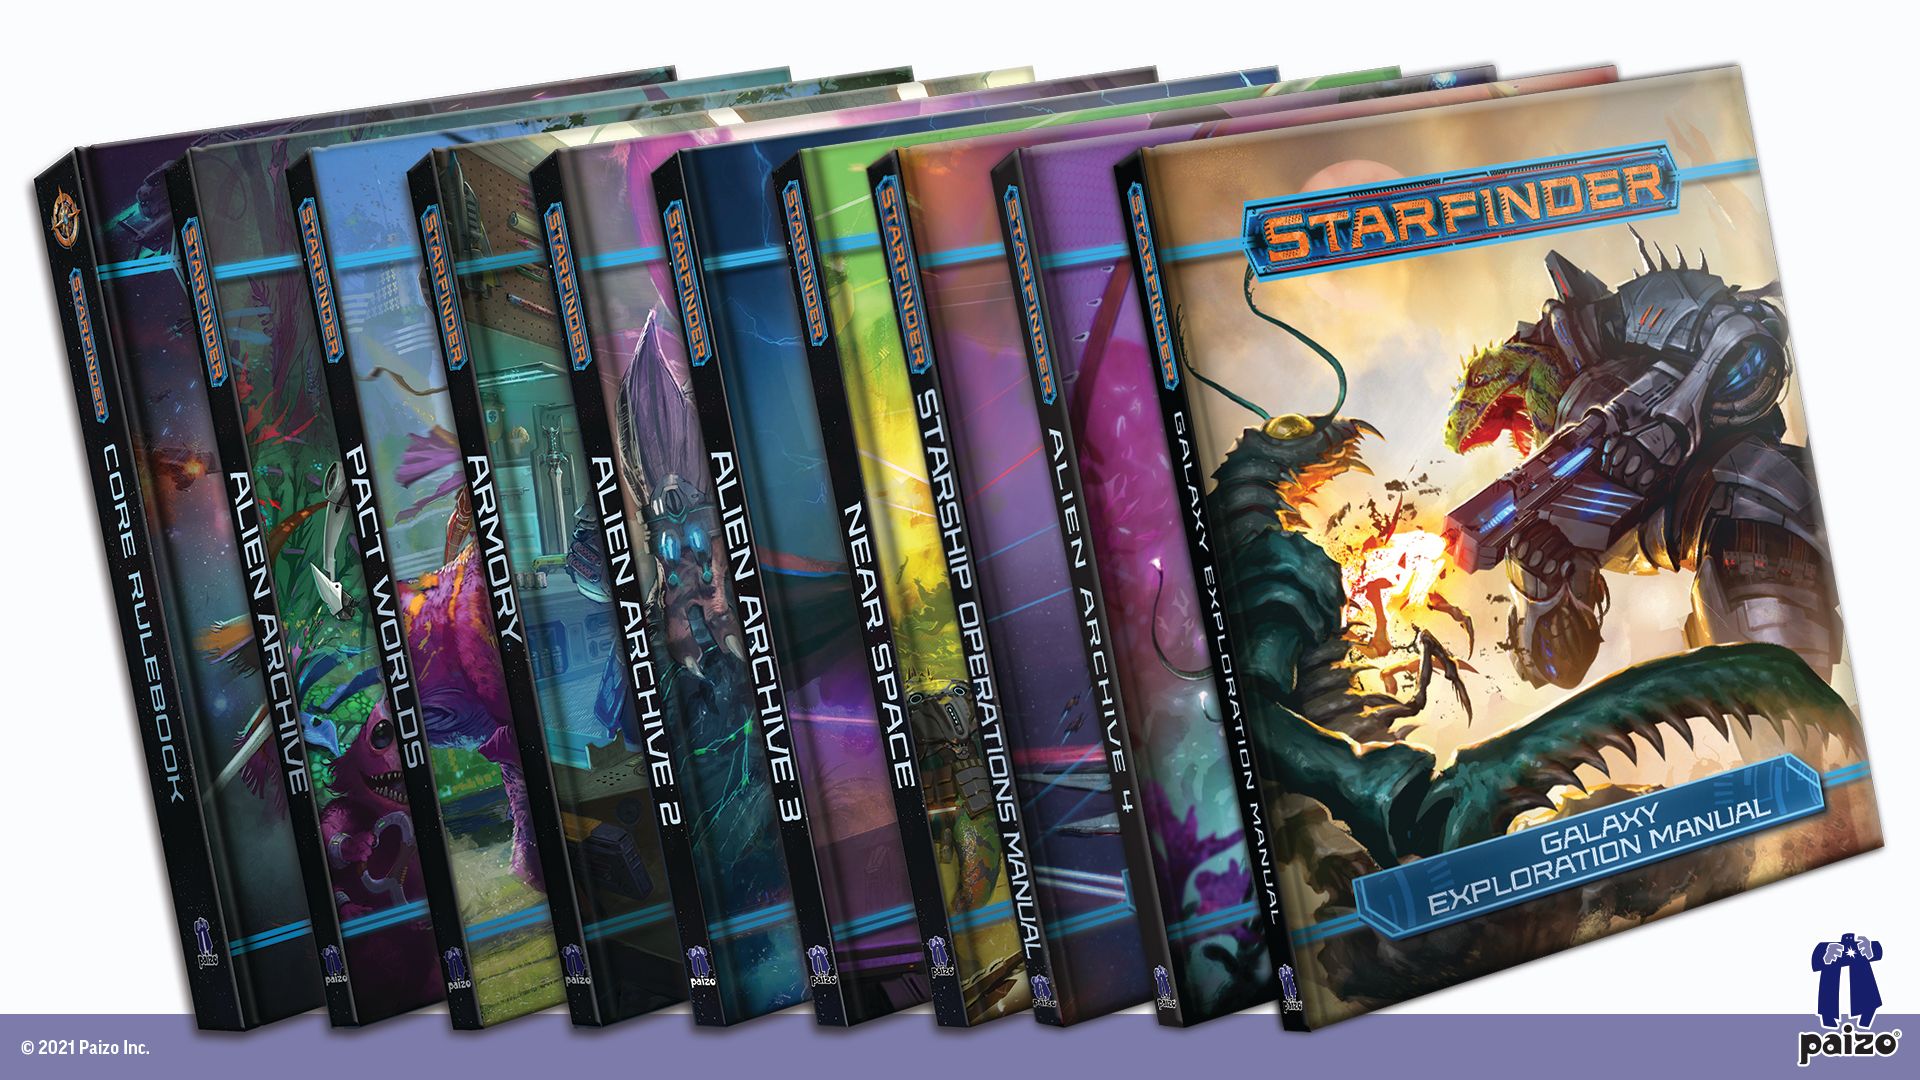 An image of all of the current starfinder rulebooks